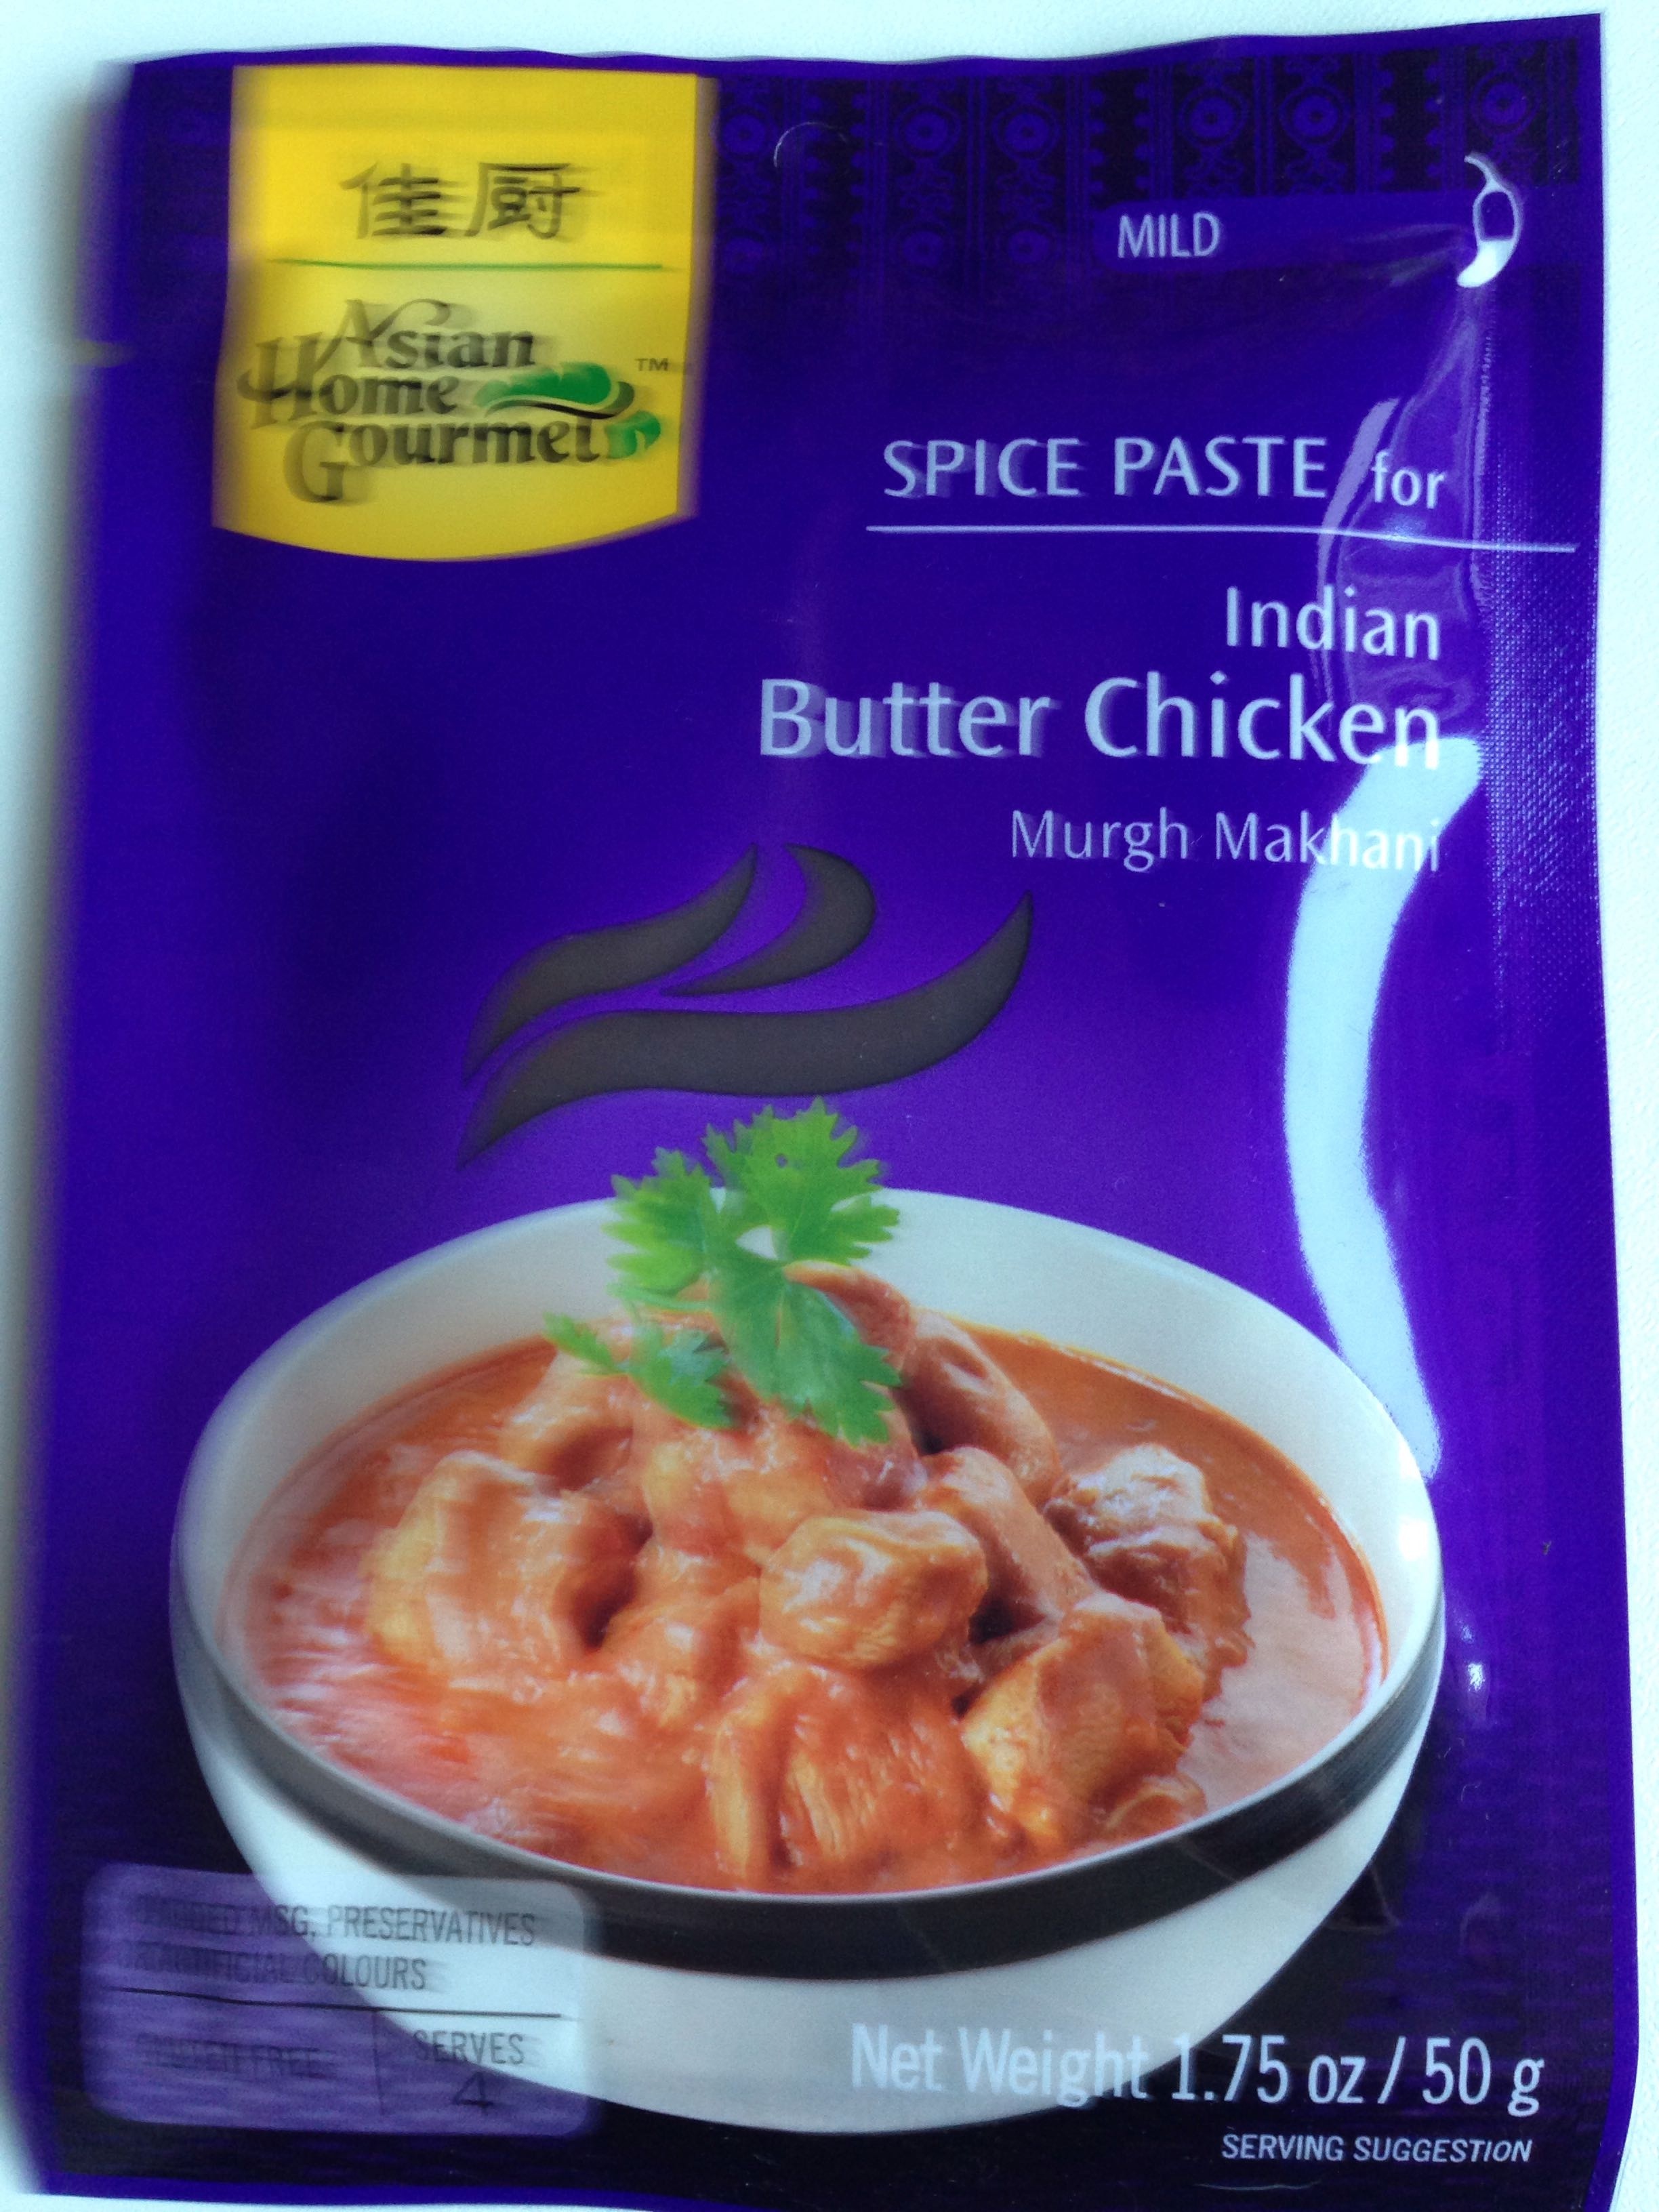 Asian home gourmet, spice paste for indian butter chicken, mild - Product